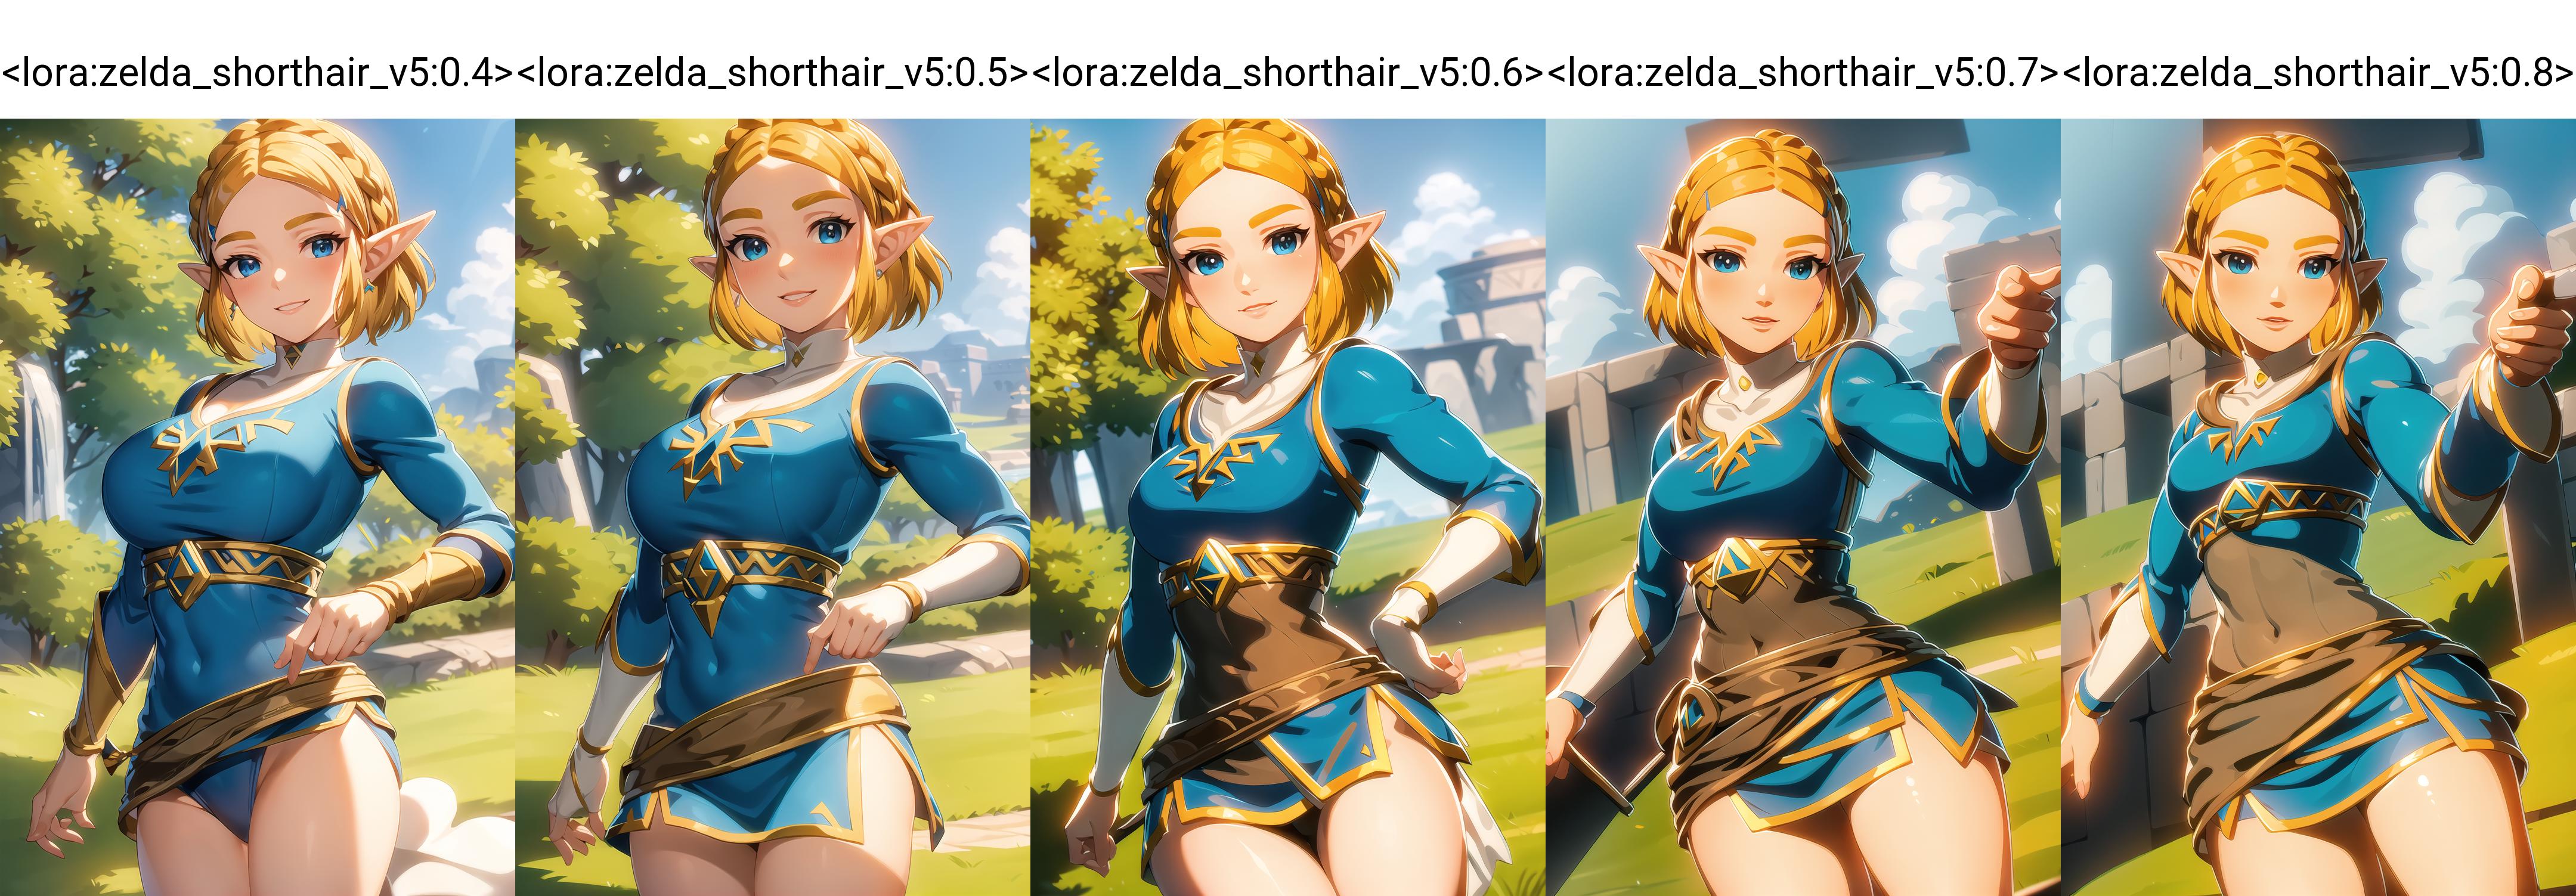 AI model image by 1zgame